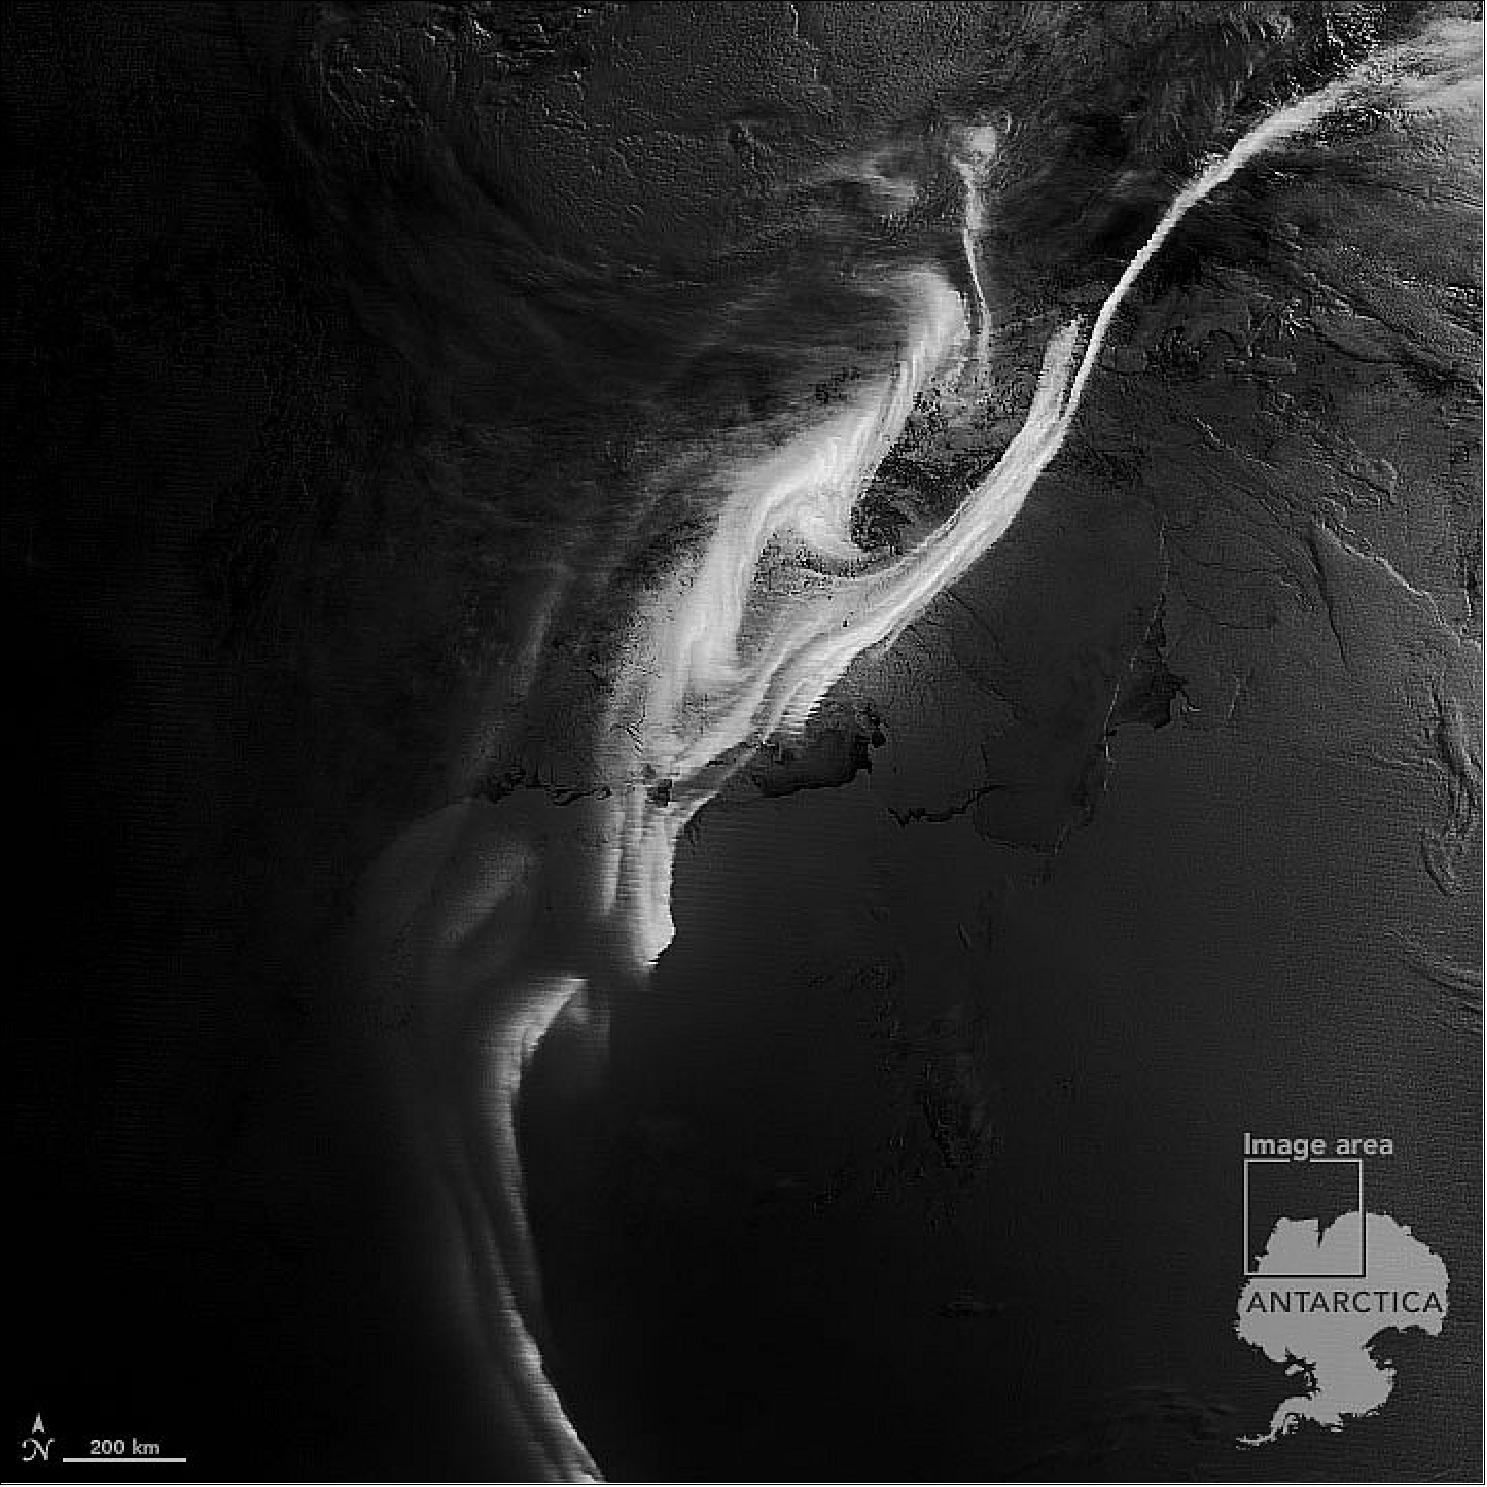 Figure 10: This image was acquired by the Visible Infrared Imaging Radiometer Suite (VIIRS) on the NASA-NOAA Suomi NPP satellite in the early morning hours of July 18, 2022. The aurora and the light of the waning gibbous Moon faintly illuminated the icy coast of eastern Antarctica. VIIRS has a day-night band that detects nighttime light in a range of wavelengths from green to near-infrared and uses filtering techniques to observe signals such as city lights, auroras, and reflected moonlight (image credit: NASA Earth Observatory image by Joshua Stevens, using VIIRS day-night band data from the Suomi National Polar-orbiting Partnership. Story by Michael Carlowicz)